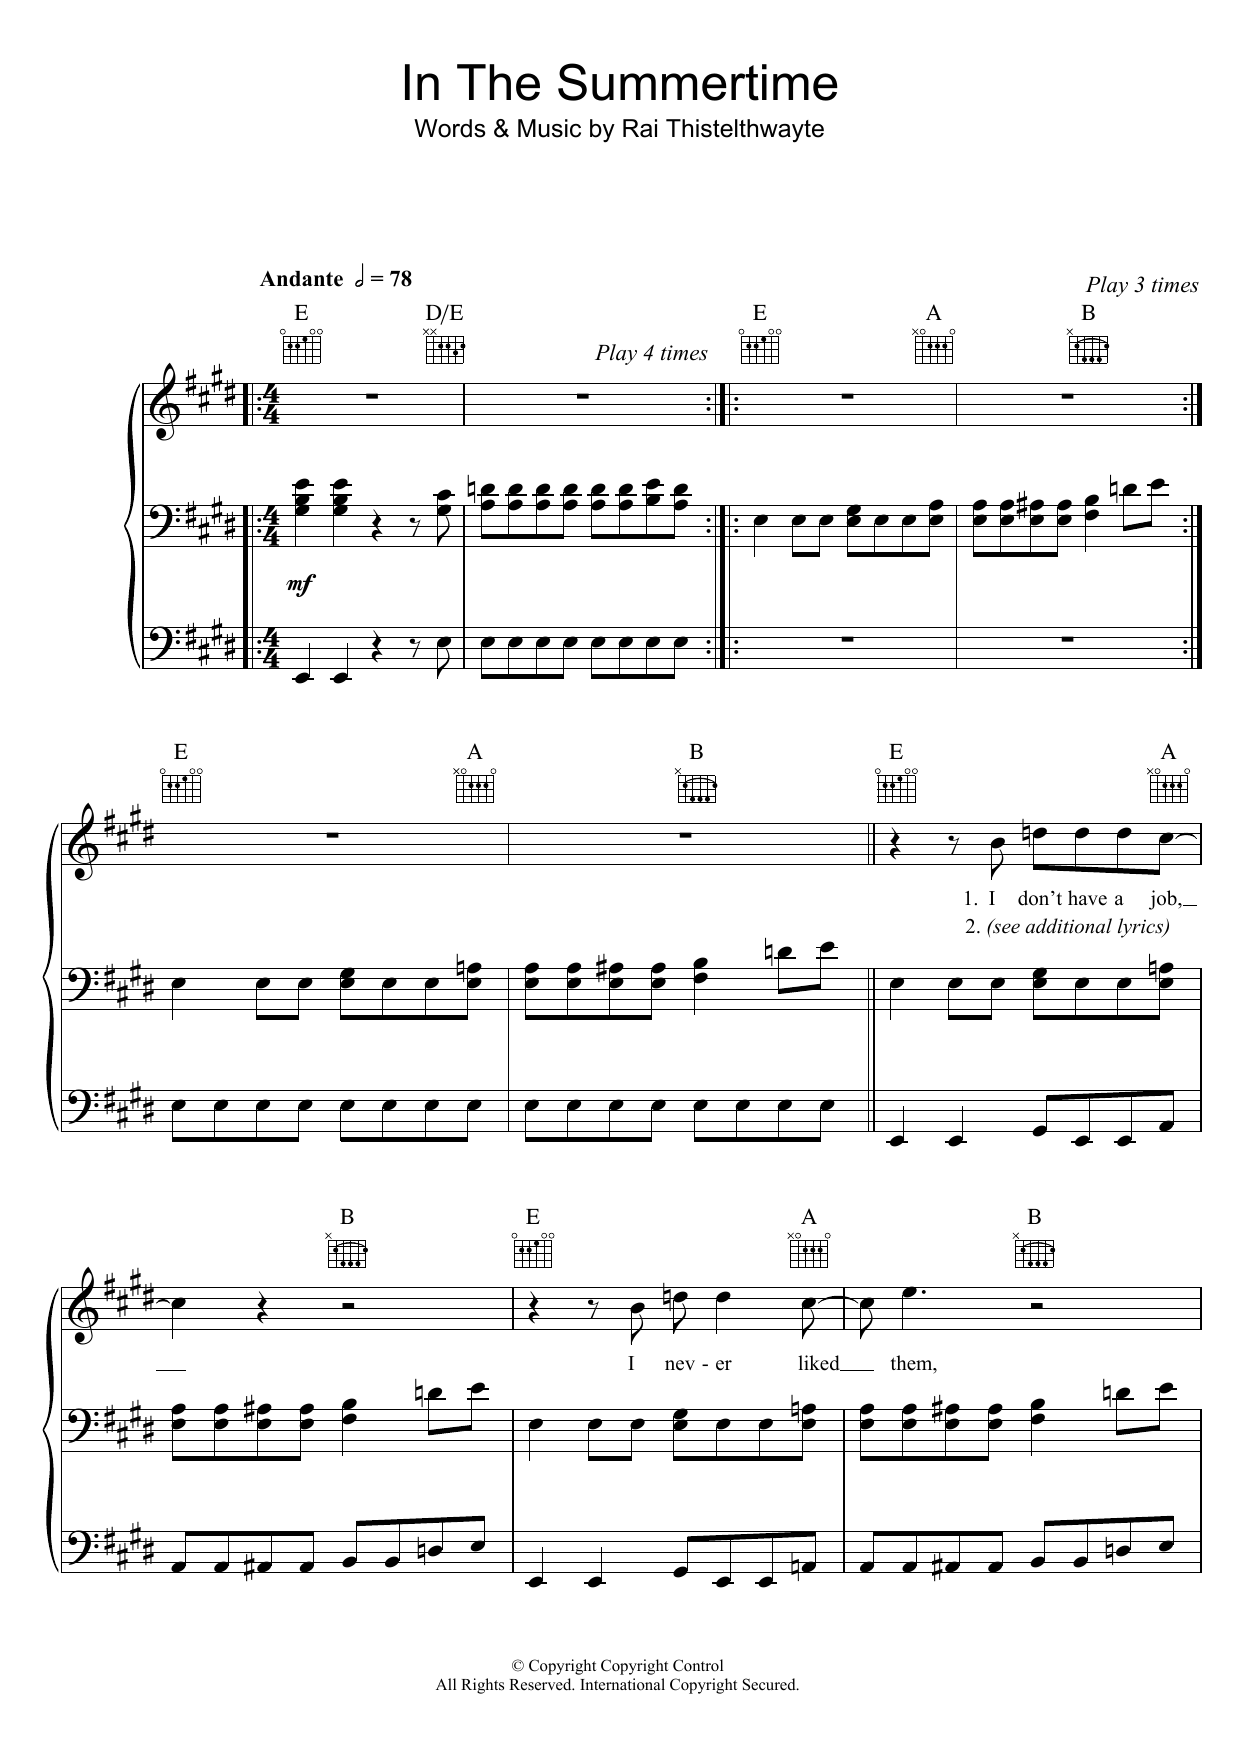 Thirsty Merc In The Summertime sheet music preview music notes and score for Piano, Vocal & Guitar including 7 page(s)